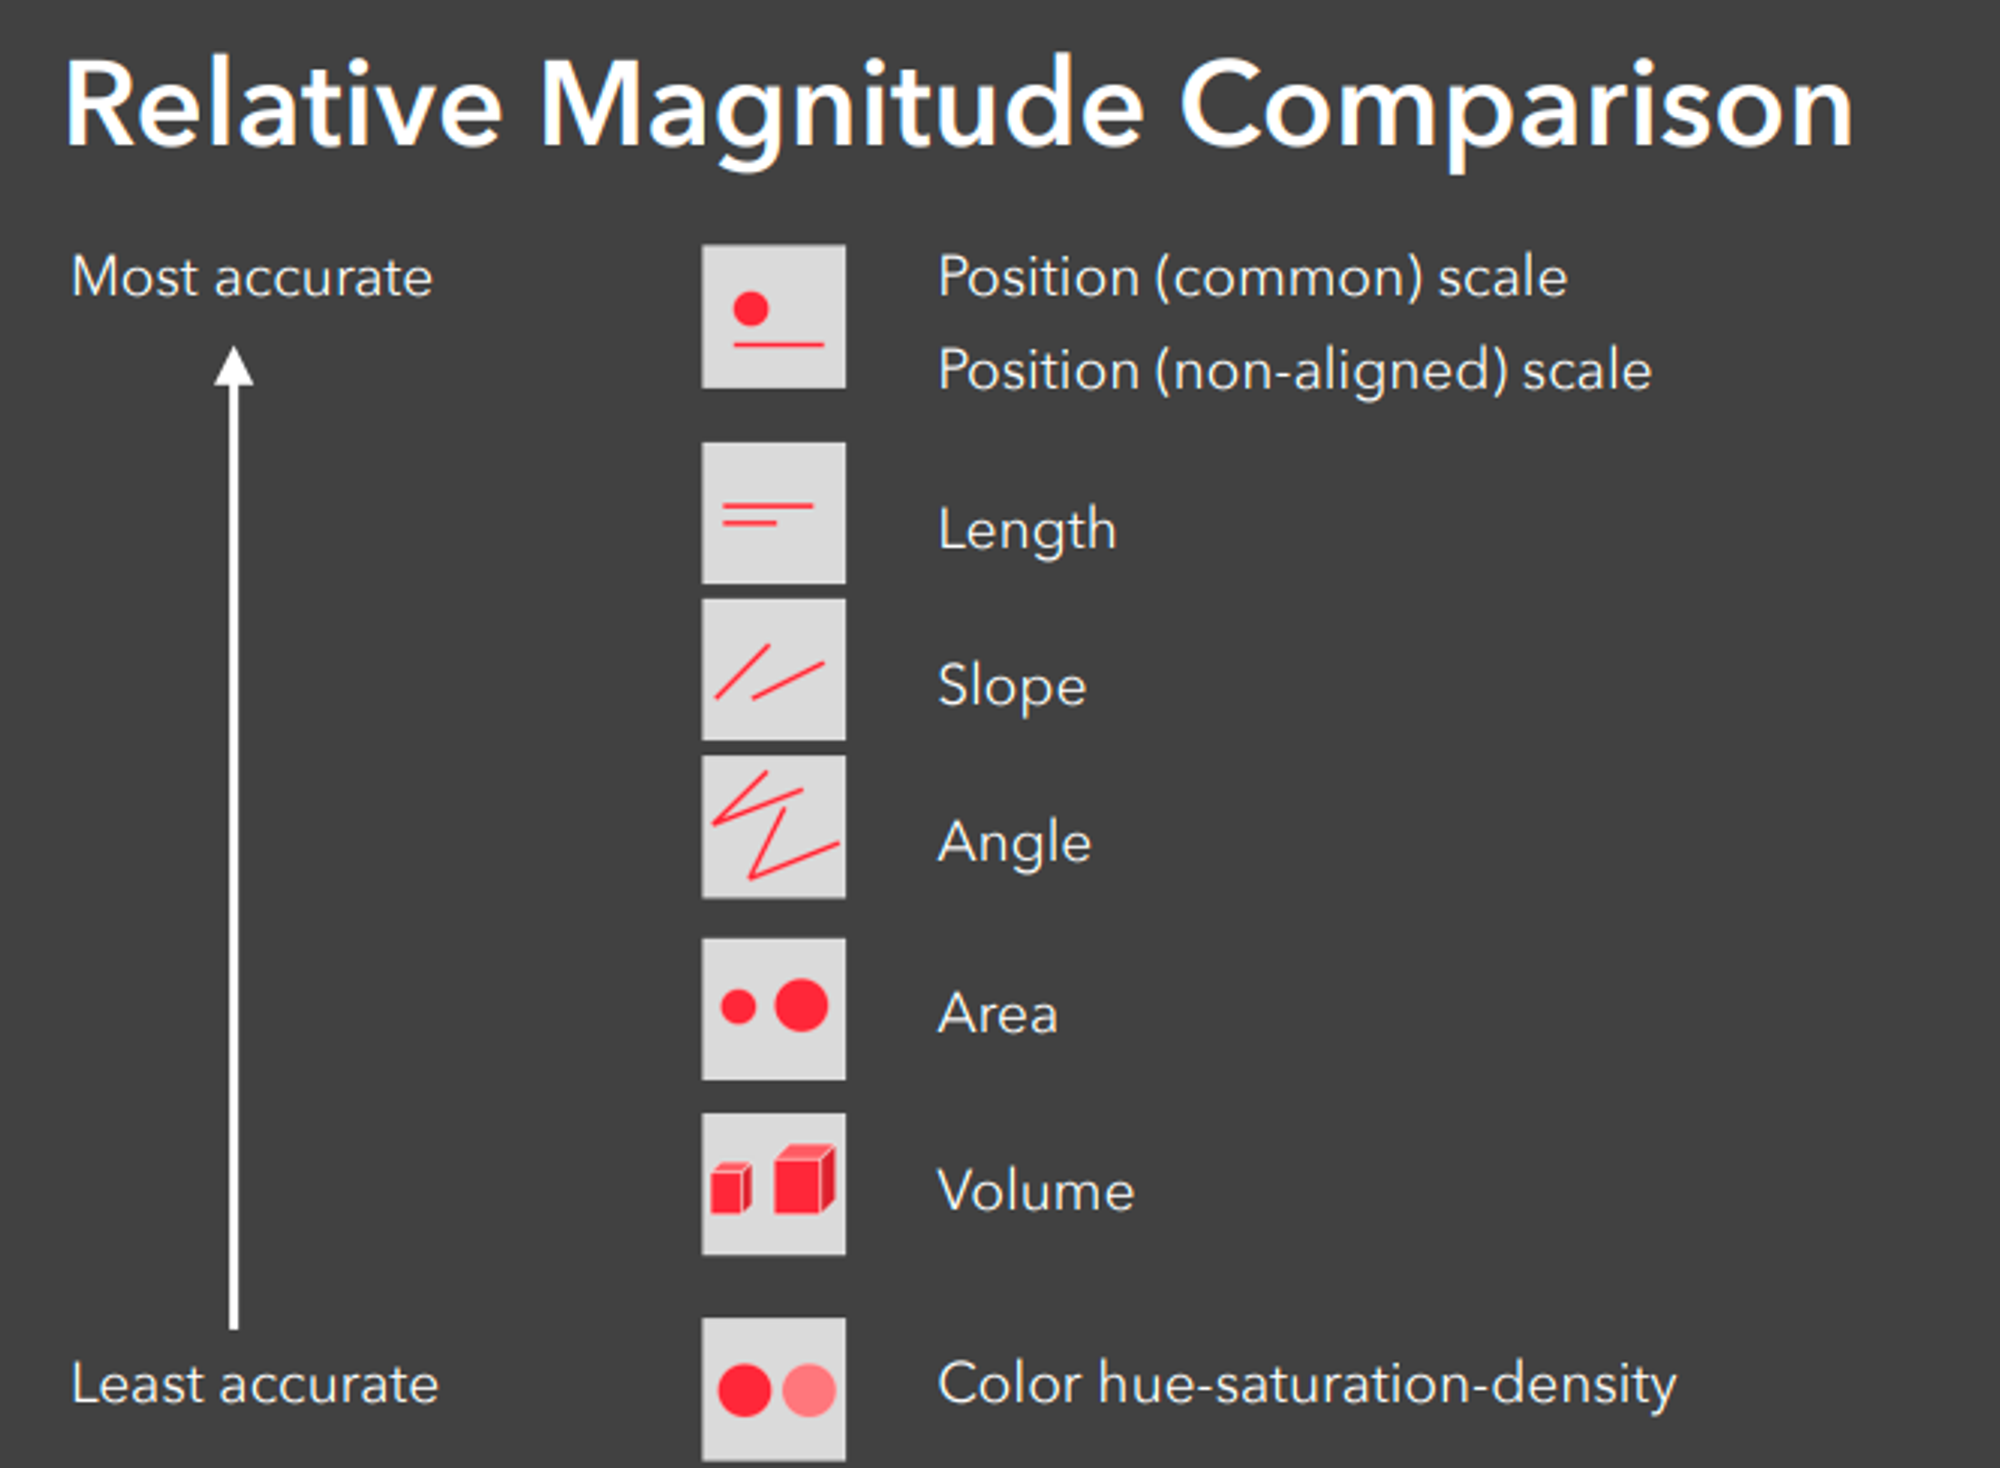 Bar Charts: Visualizing Quantitative Sizes and Differences in Data